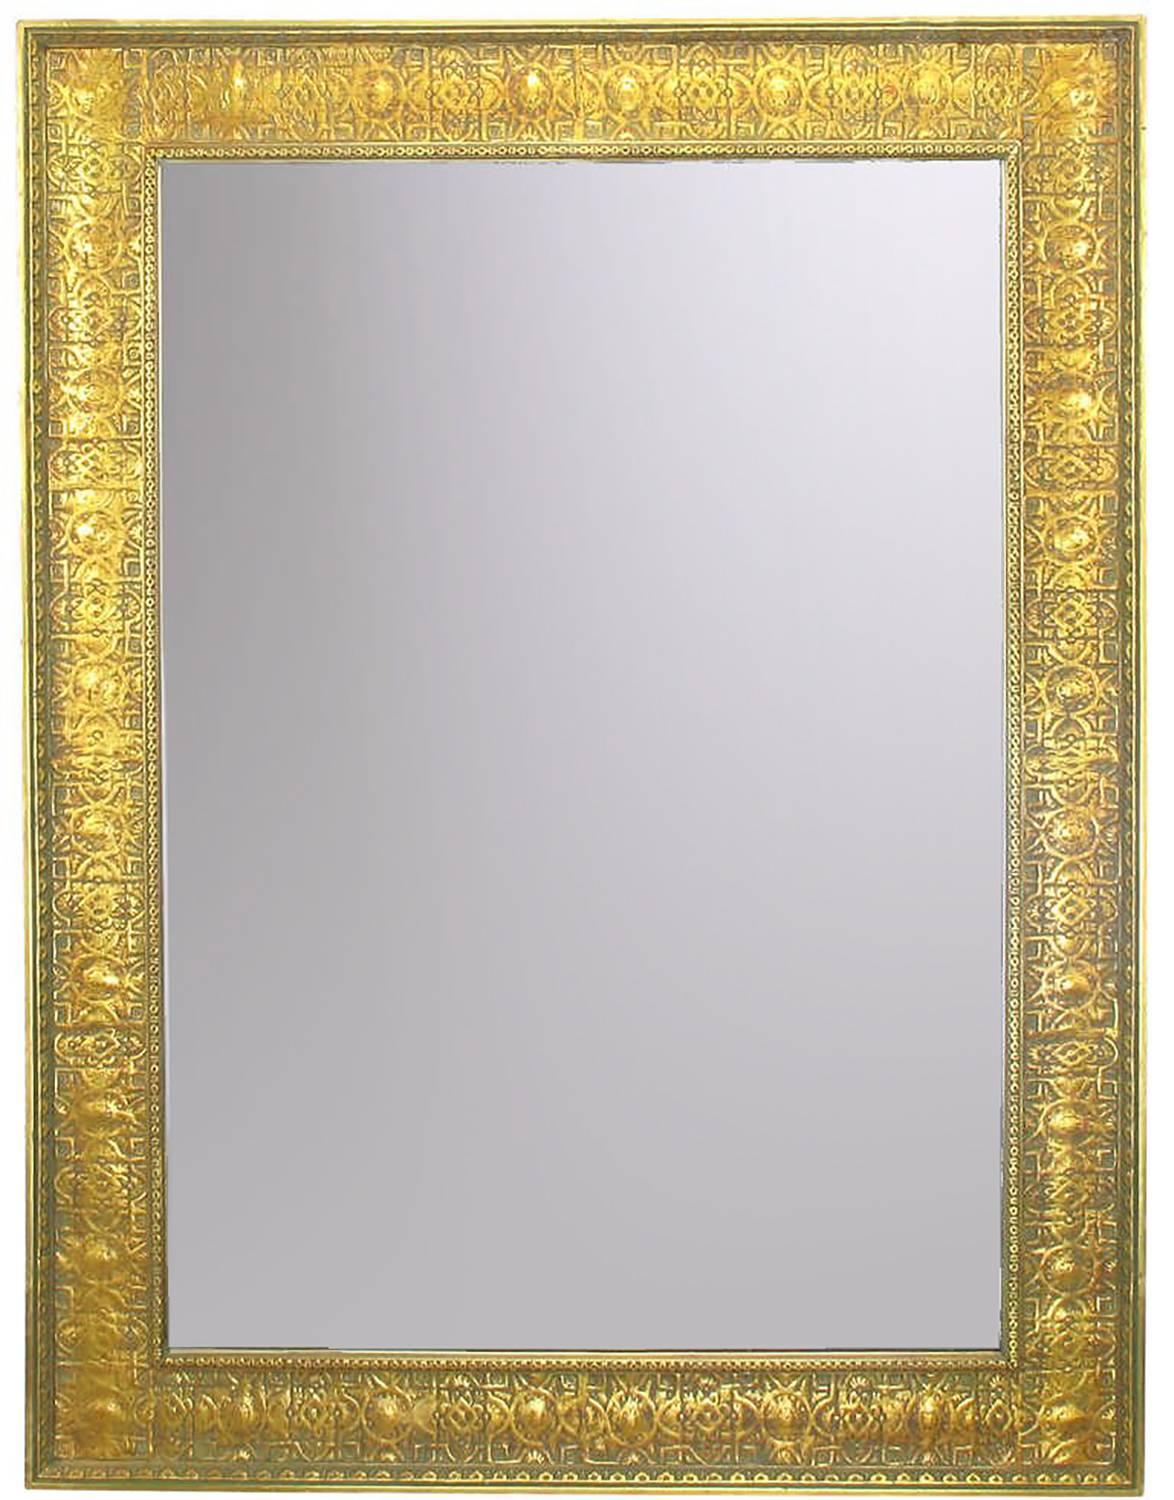 Pair of large gesso and wood framed wall mirrors with Egyptian motif. No doubt inspired by Howard Carter's 1922 discovery of King Tut's tomb. One mirror shows more bole through the gold leaf than does the other. Minor repairs and touch ups to both